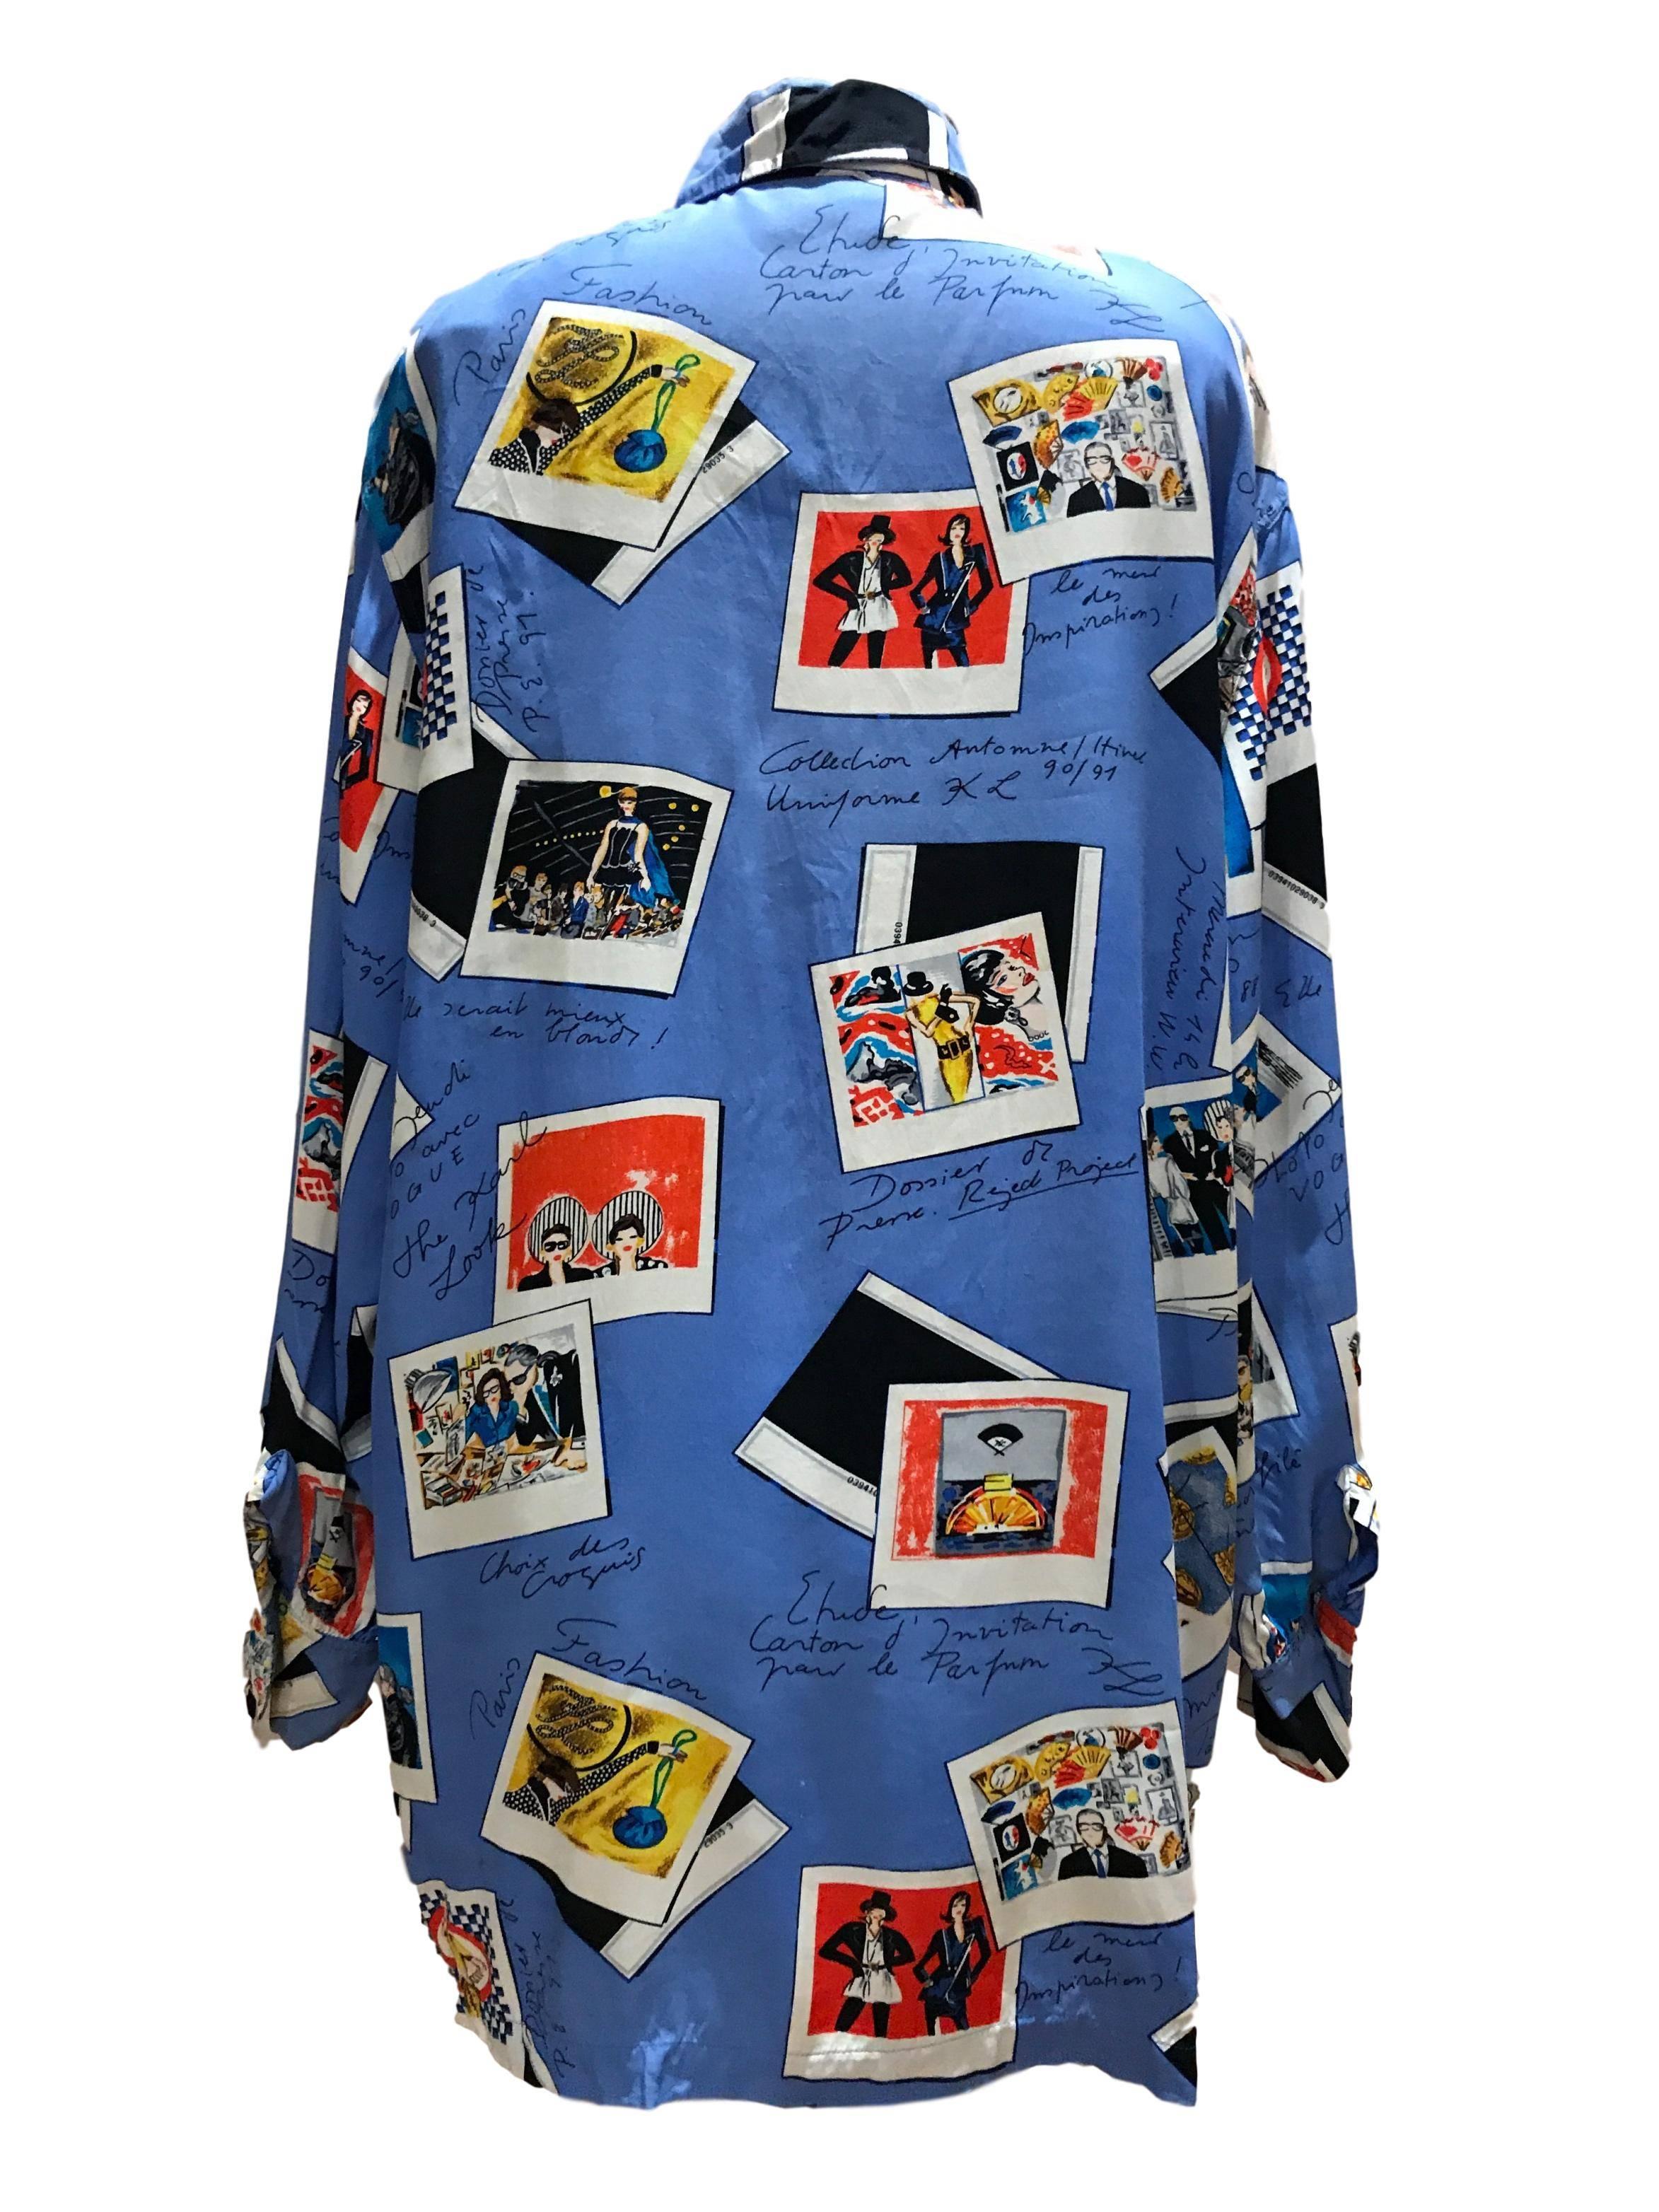 Karl Lagerfeld KL Novelty Polaroid Print Shirt. 

Button front rayon ladies shirt made in 1990 under the KL label. 

Measures 24 inches across chest. 34 inches length. 19 inches across shoulders and 23 inch sleeve length from shoulder seal to cuff.